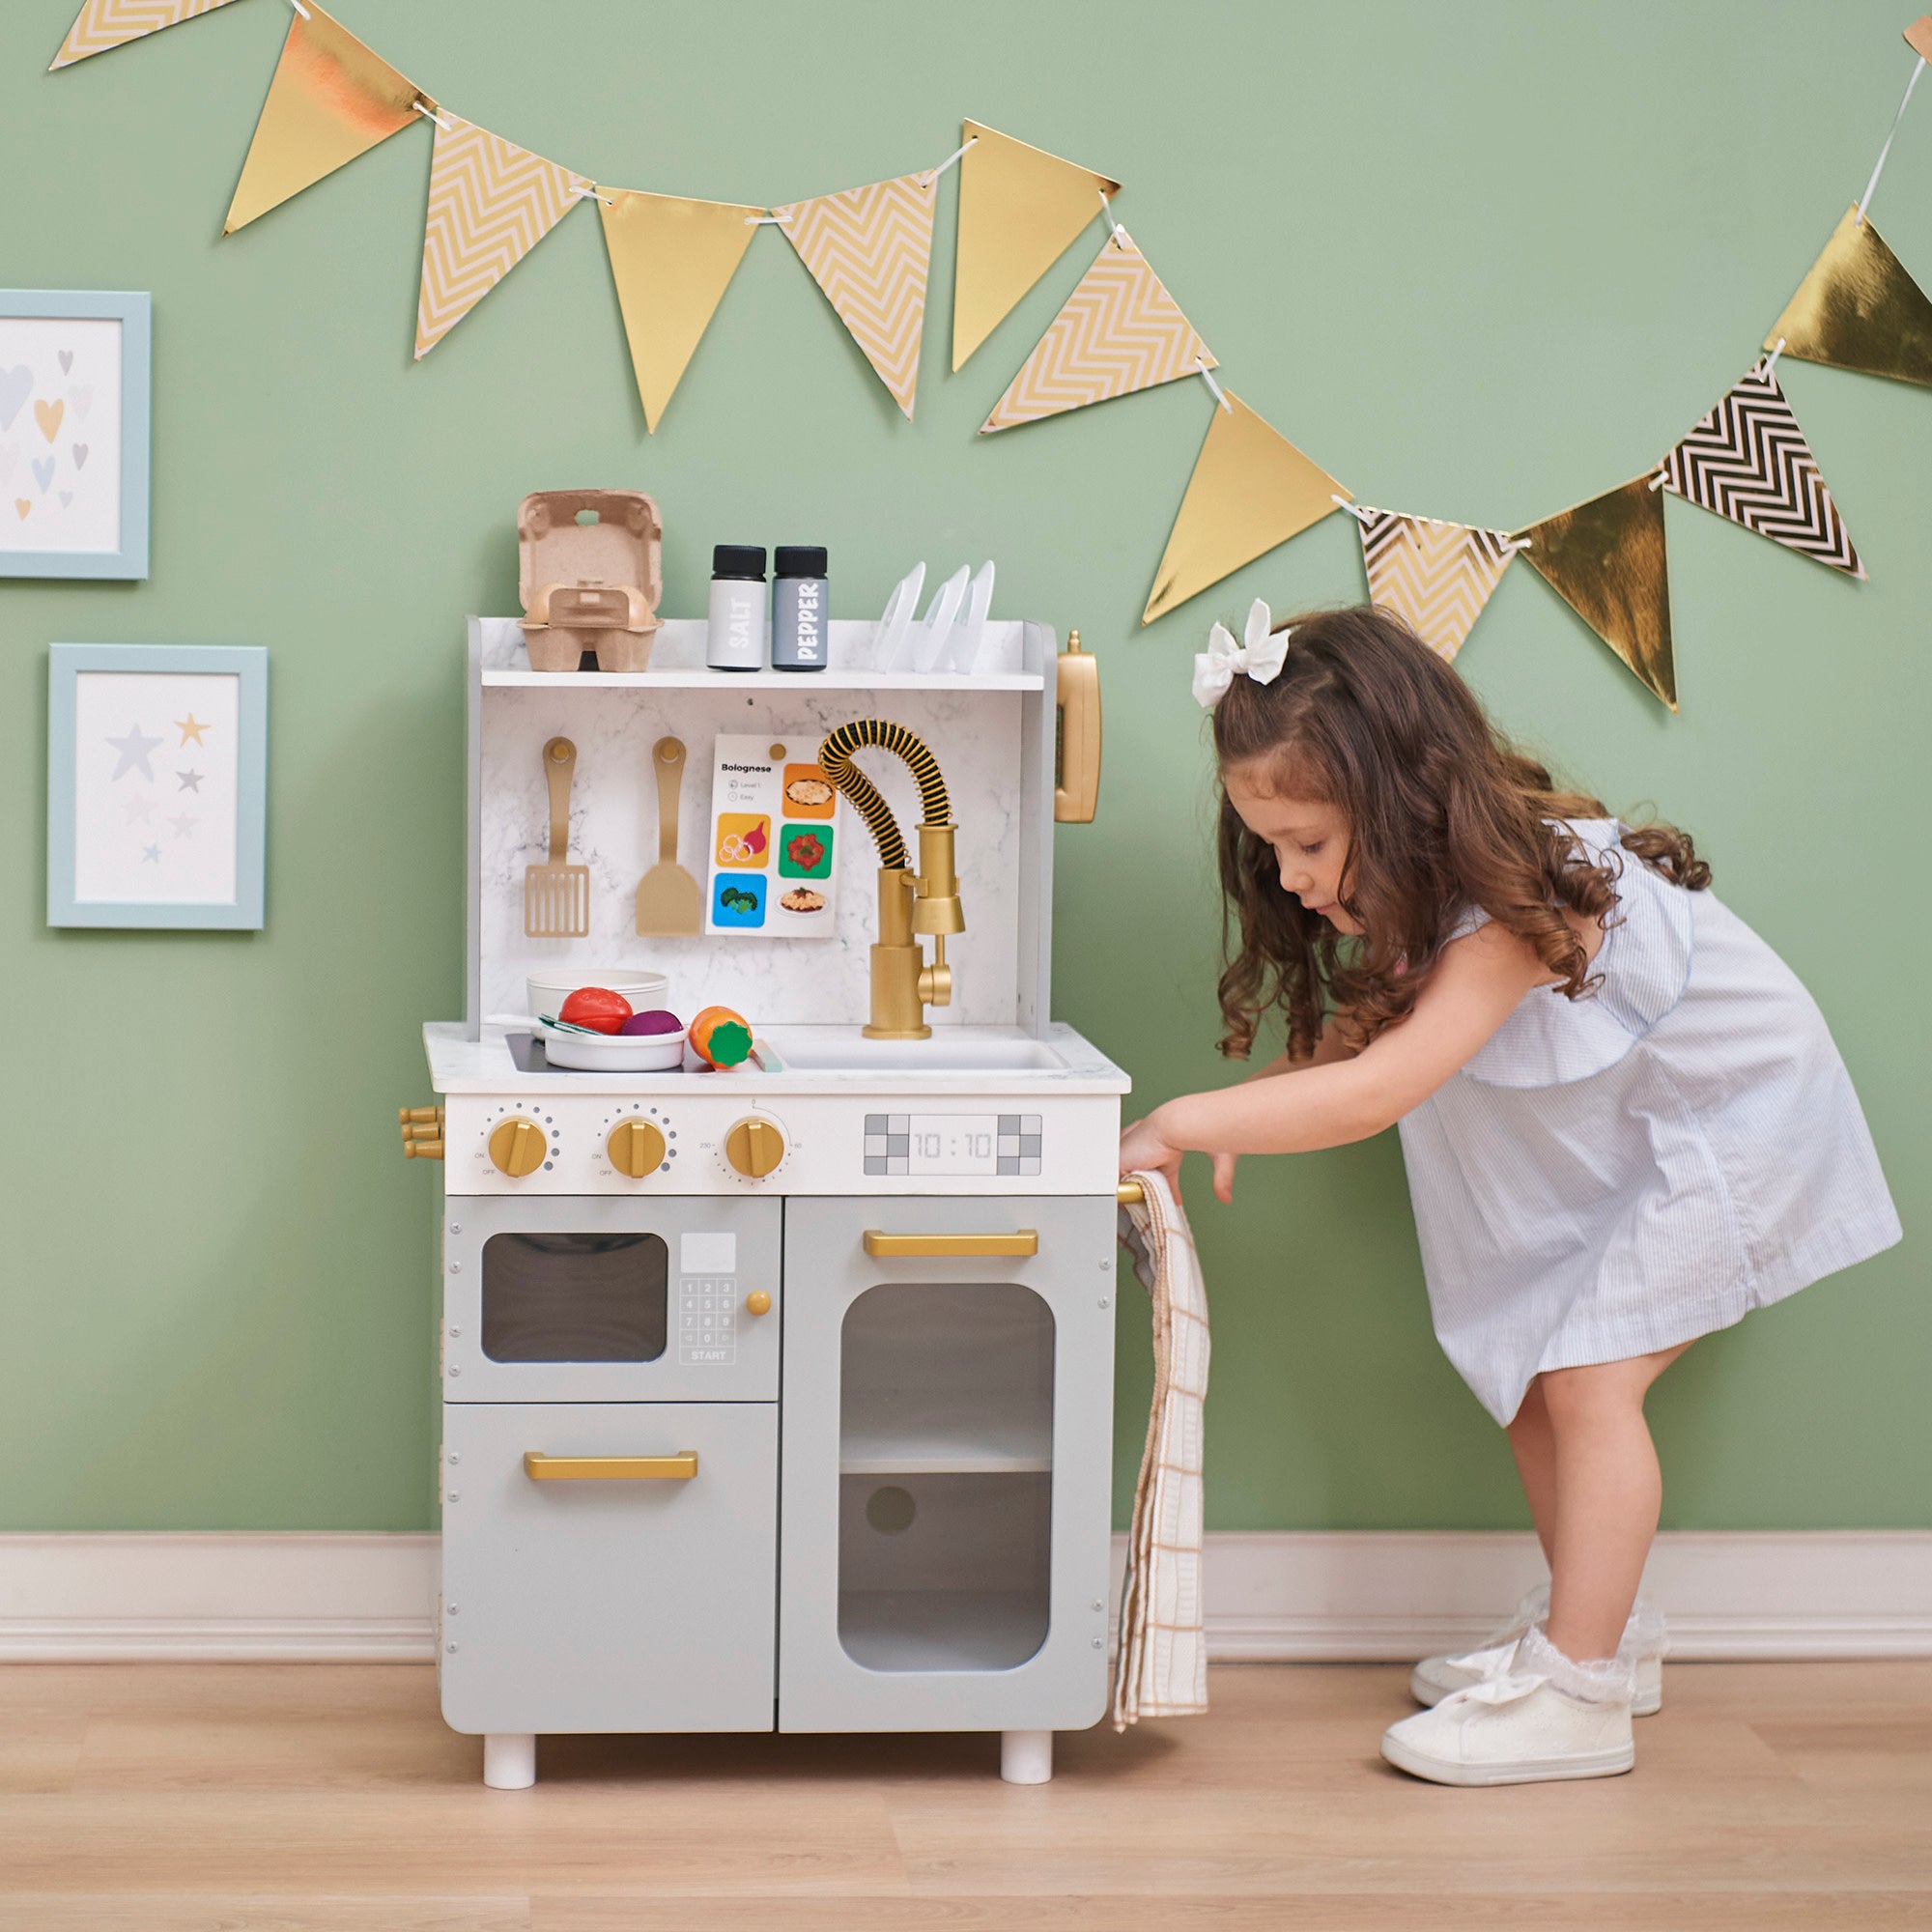 TEAMSON KIDS - LITTLE CHEF MEMPHIS SMALL PLAY KITCHEN, GRAY/GOLD